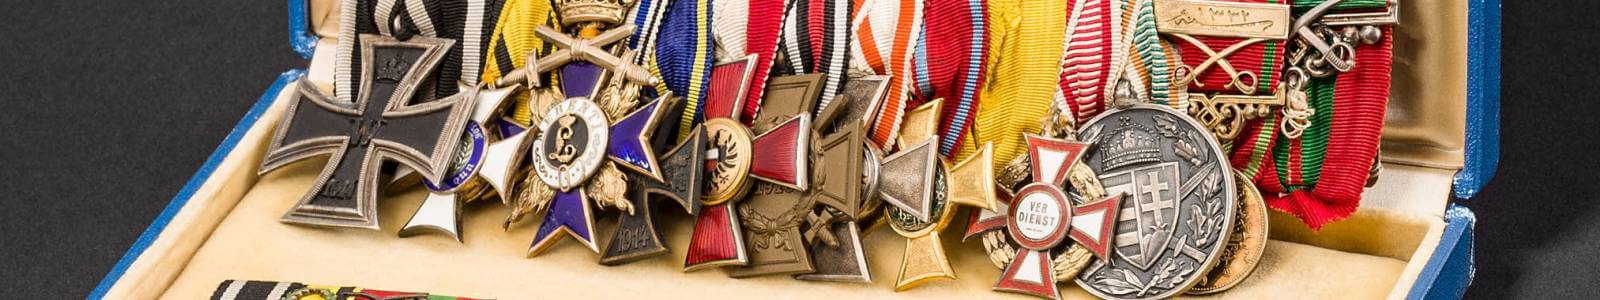 International medals & military historical collectibles